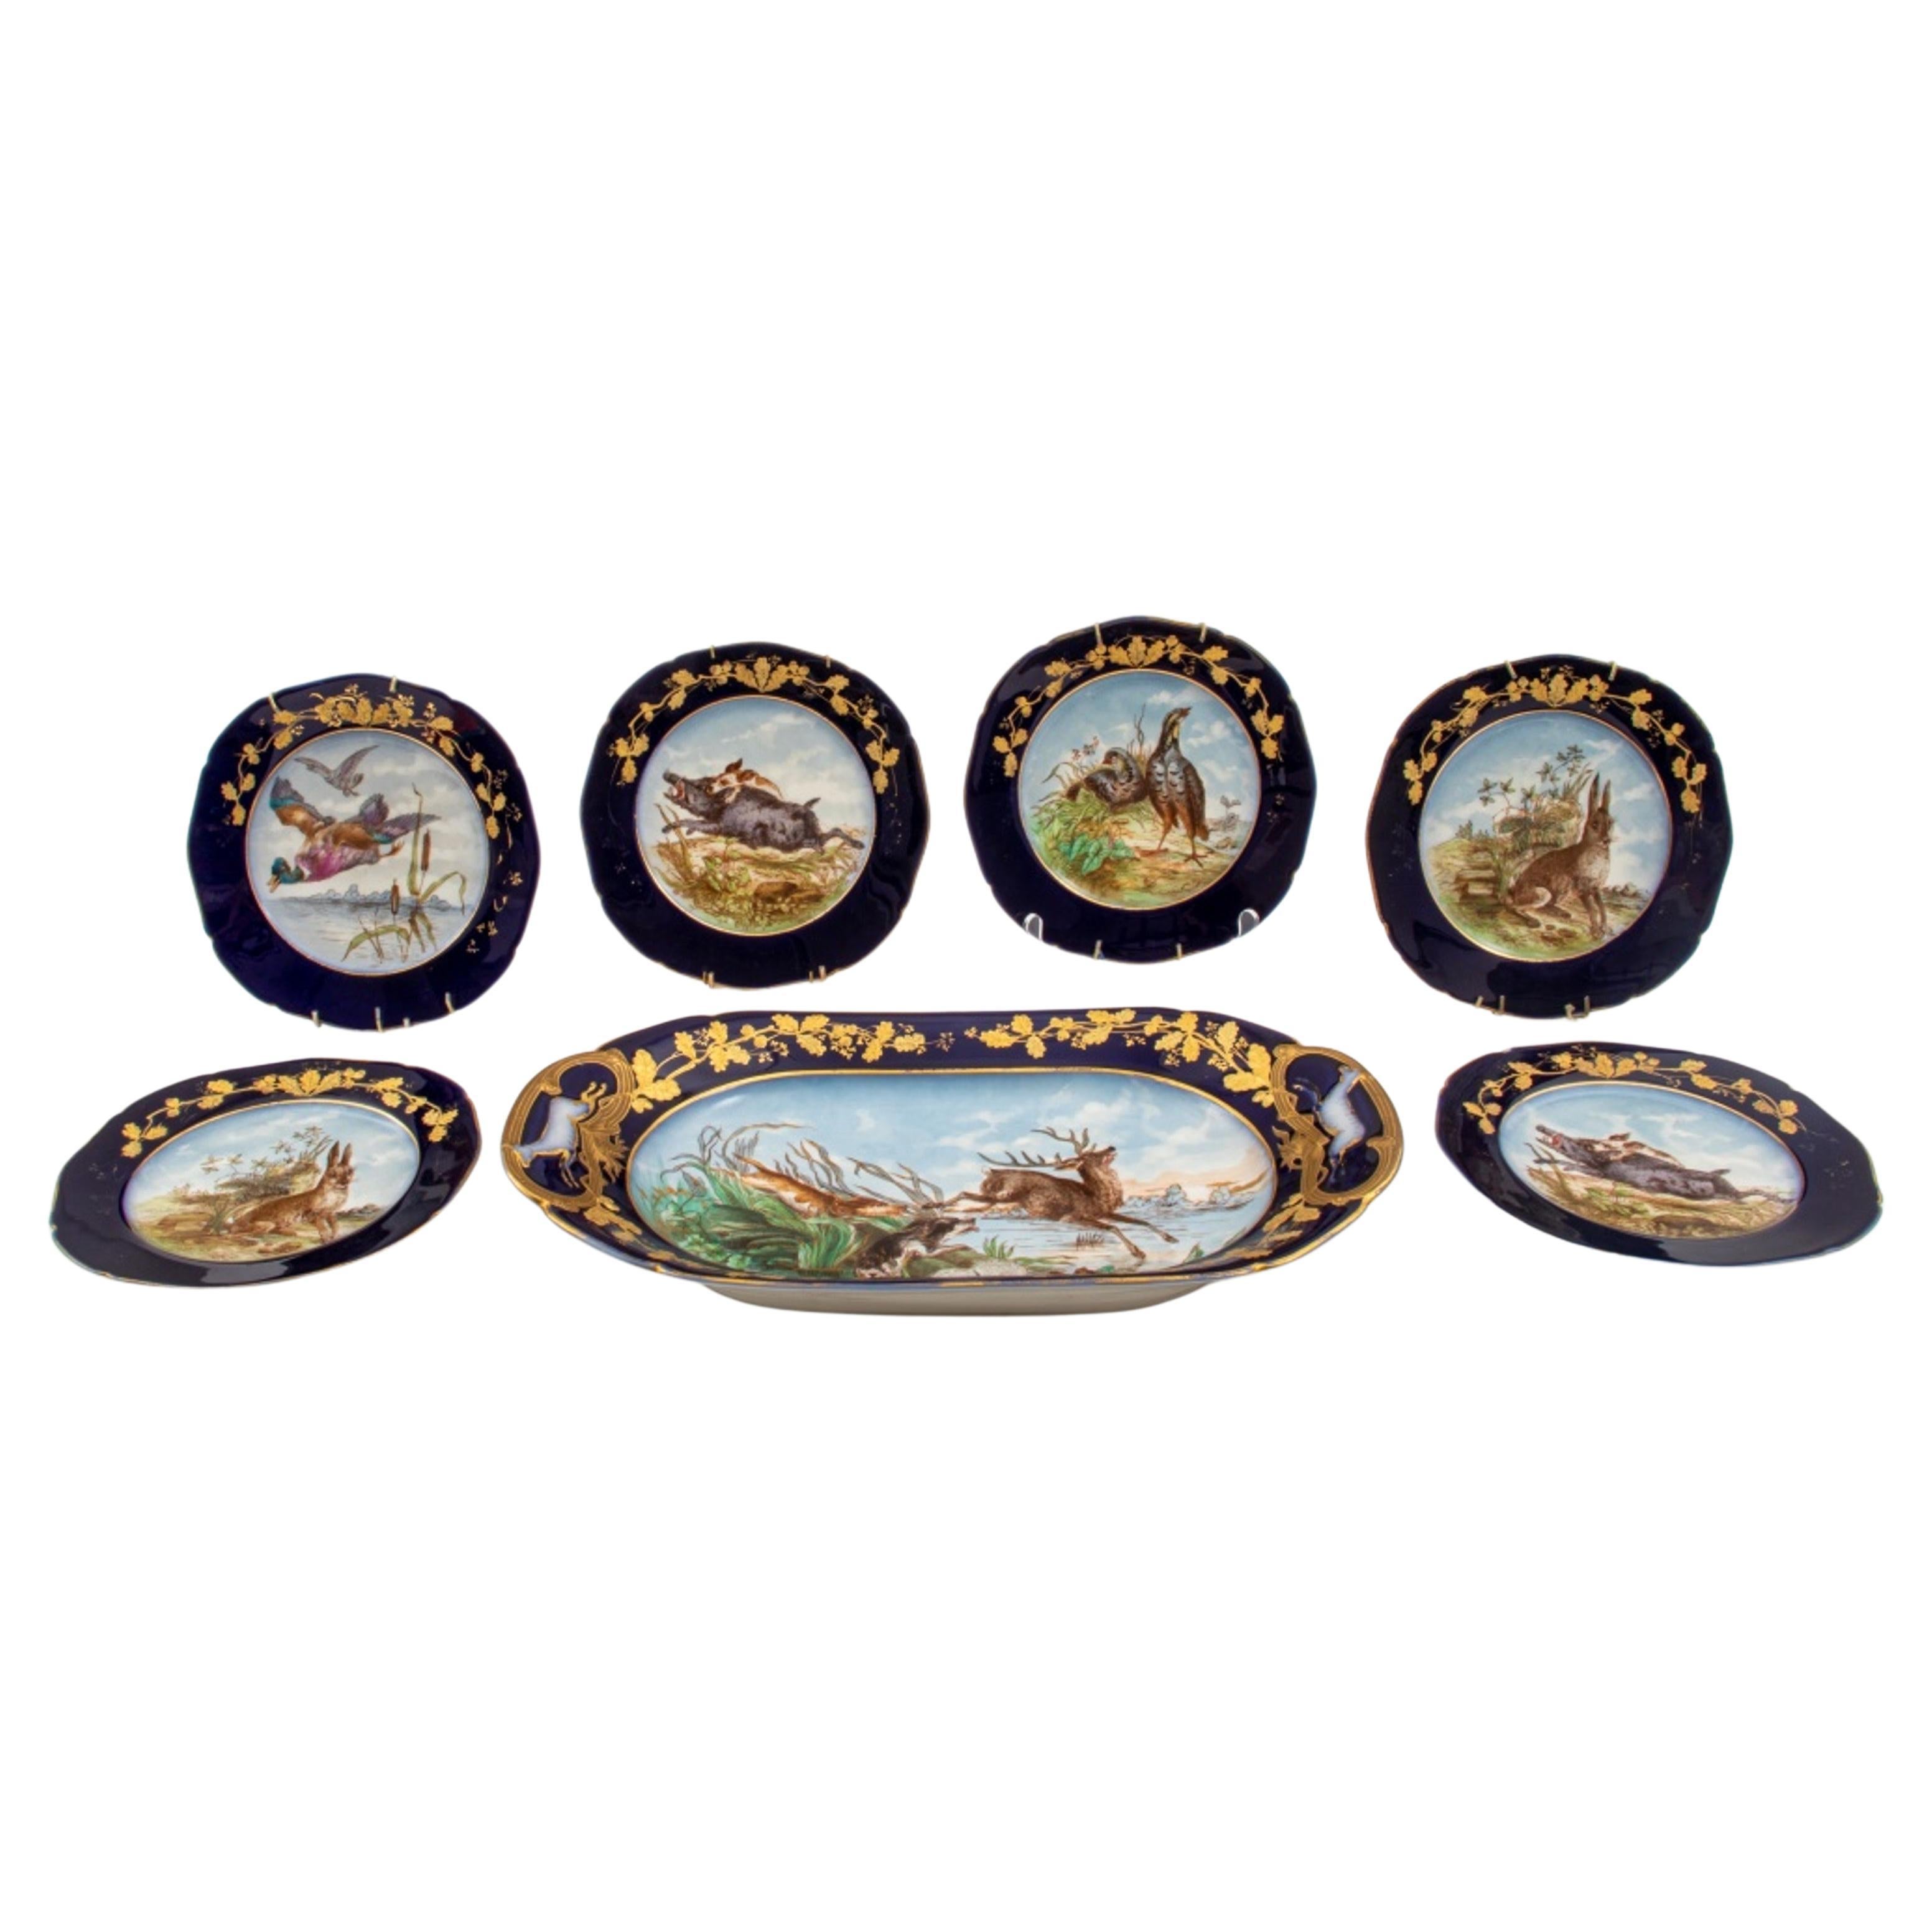 M. Redon Limoges Hunting Game Porcelain, 7 Pieces